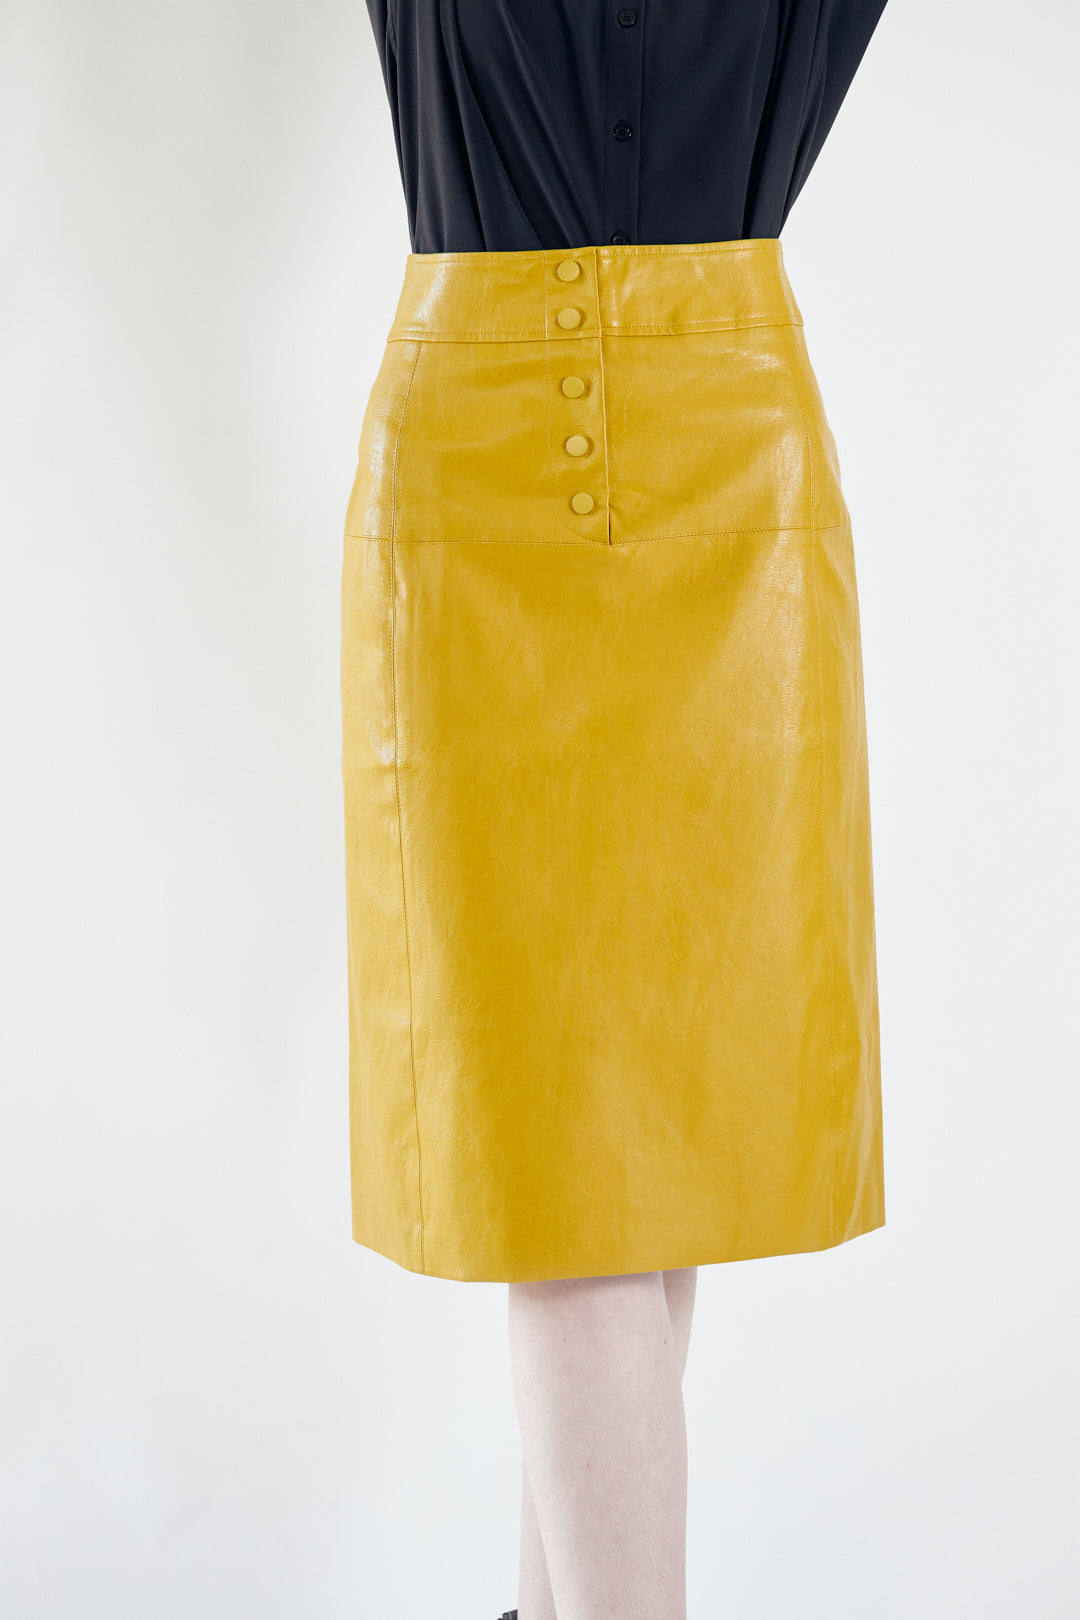 A person standing in a Glossy Vegan Leather Pencil Skirt in mustard yellow with button detailing at the back by Mauve Daisy.